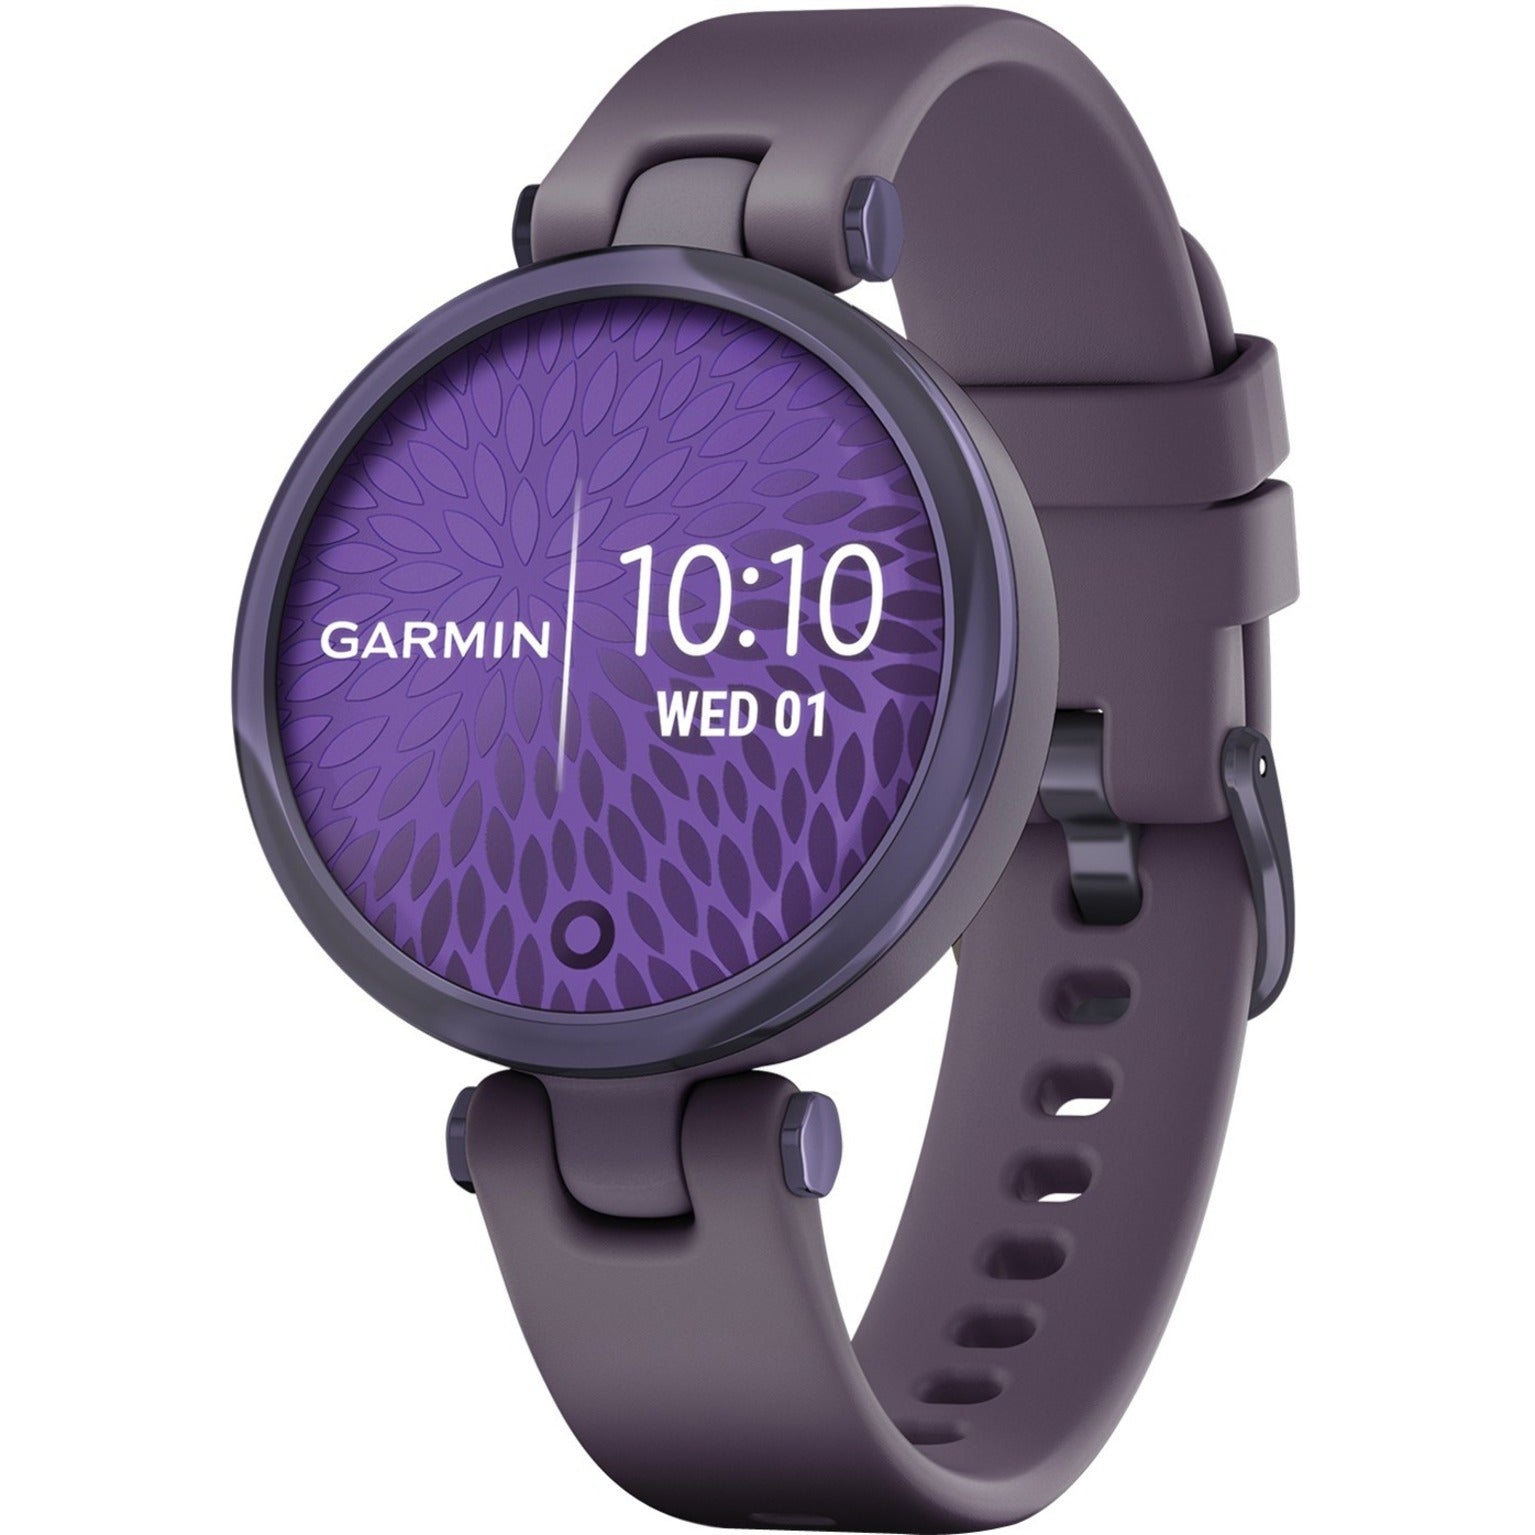 Garmin Lily Smart Watch - Water Resistant, Touchscreen, Fitness Tracker [Discontinued]